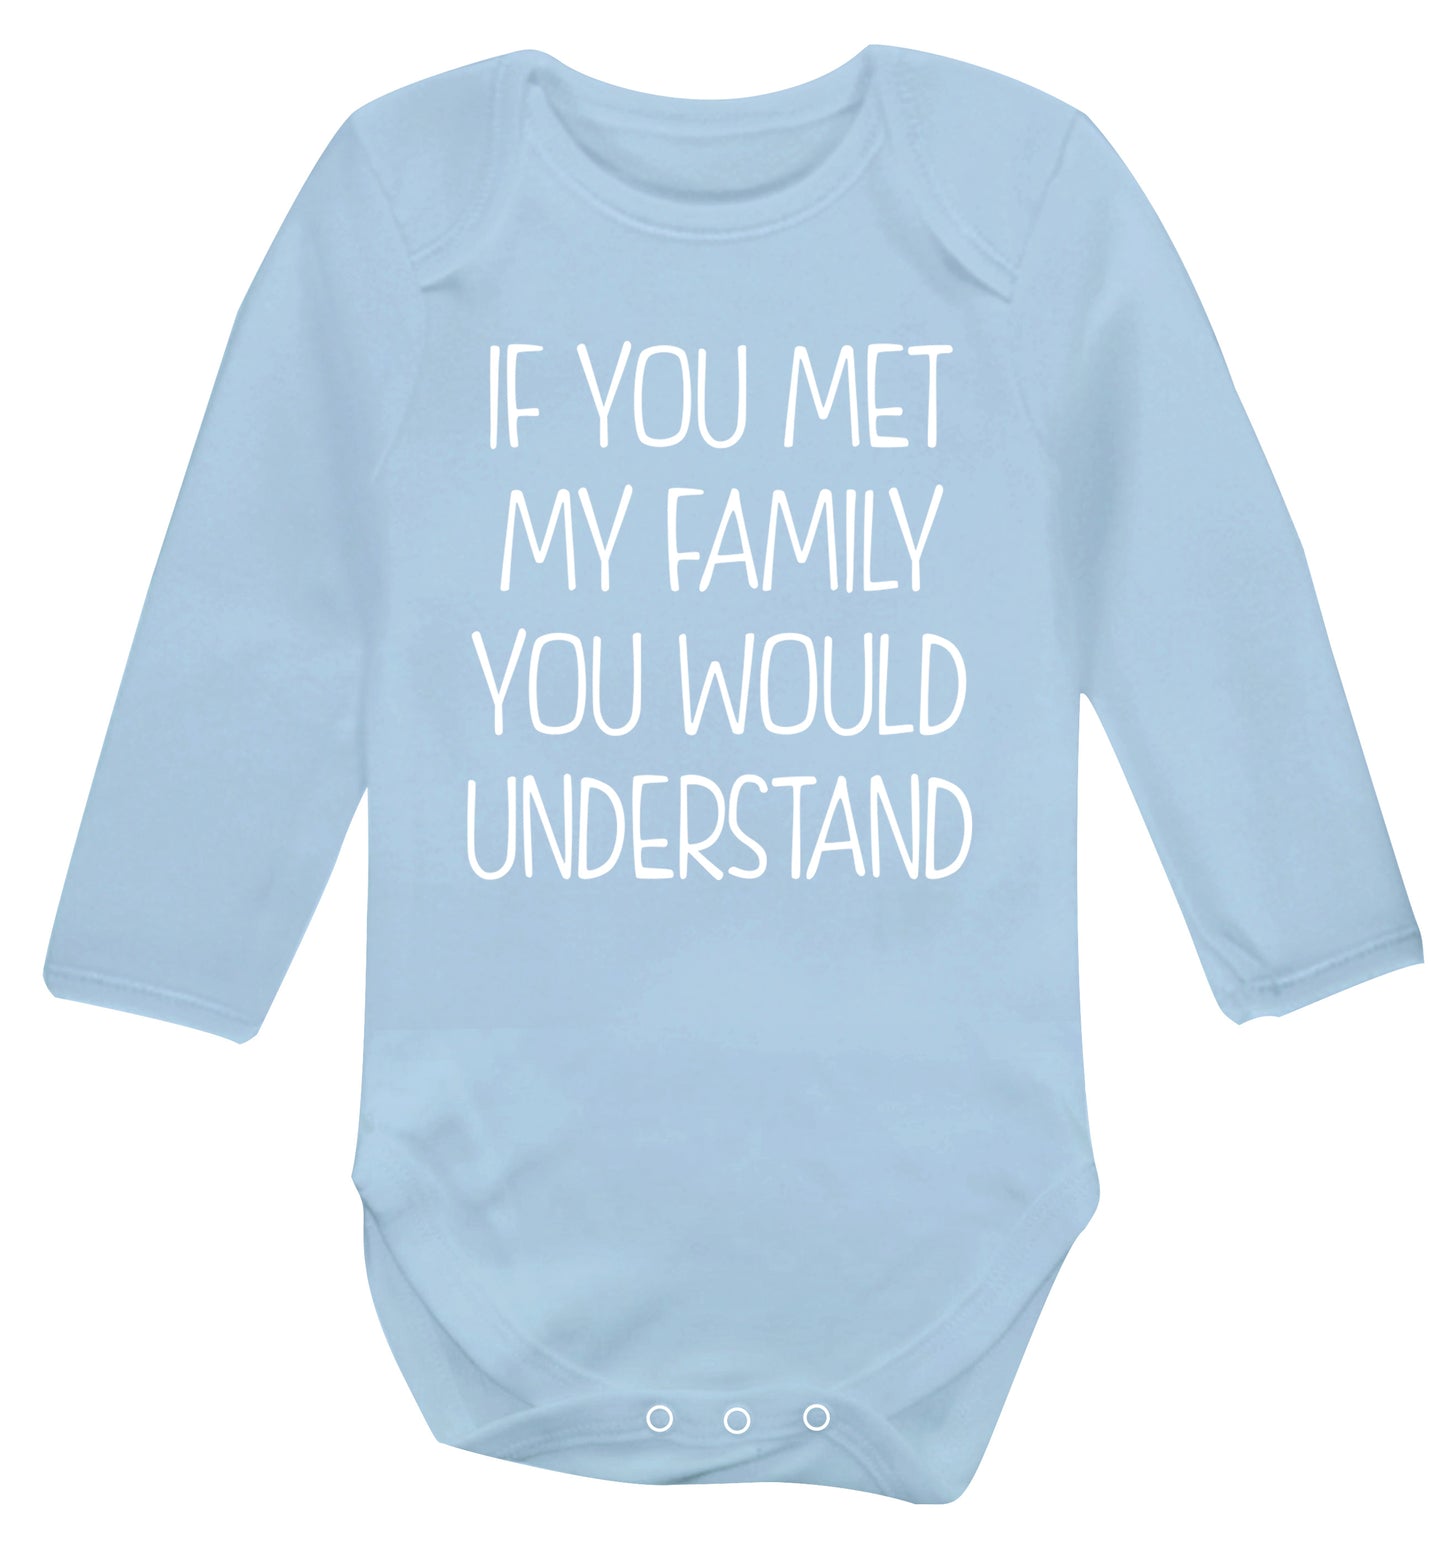 If you met my family you would understand Baby Vest long sleeved pale blue 6-12 months